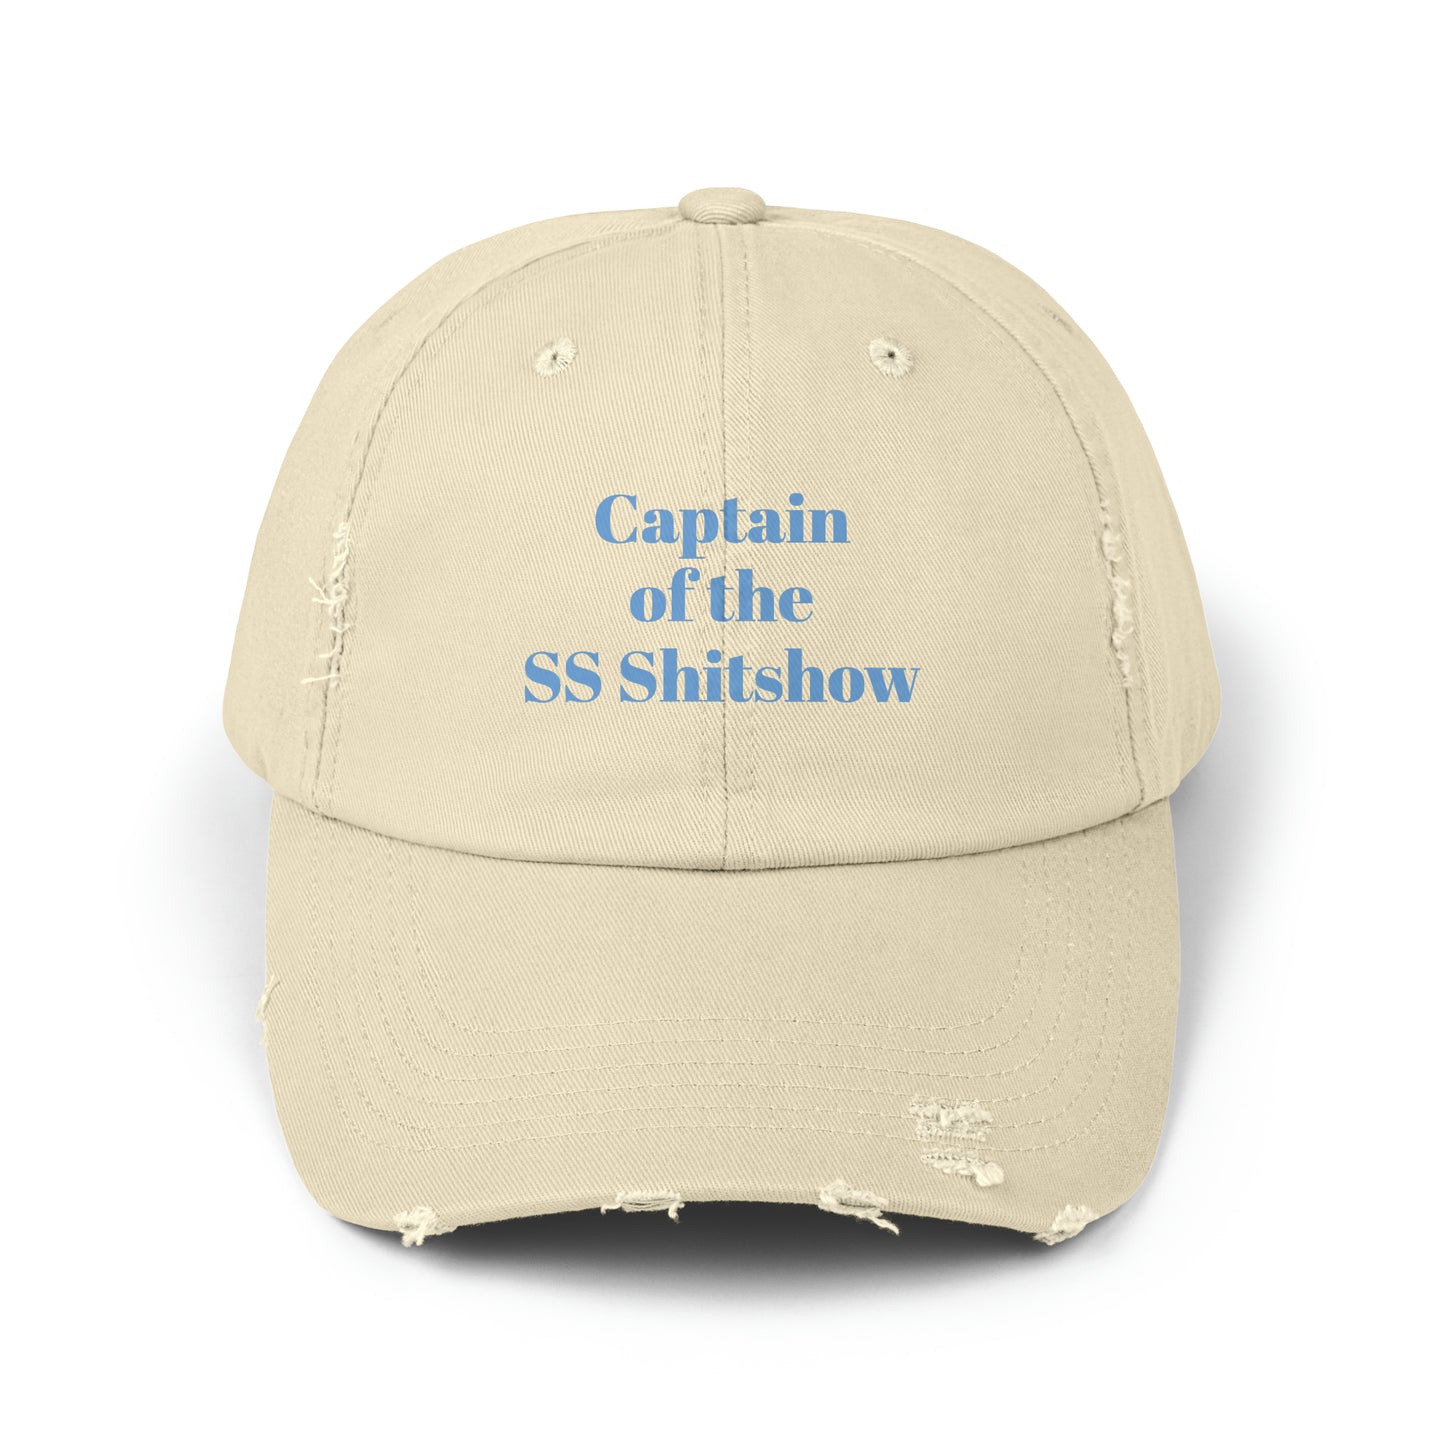 Be the Captain of your own Shitshow